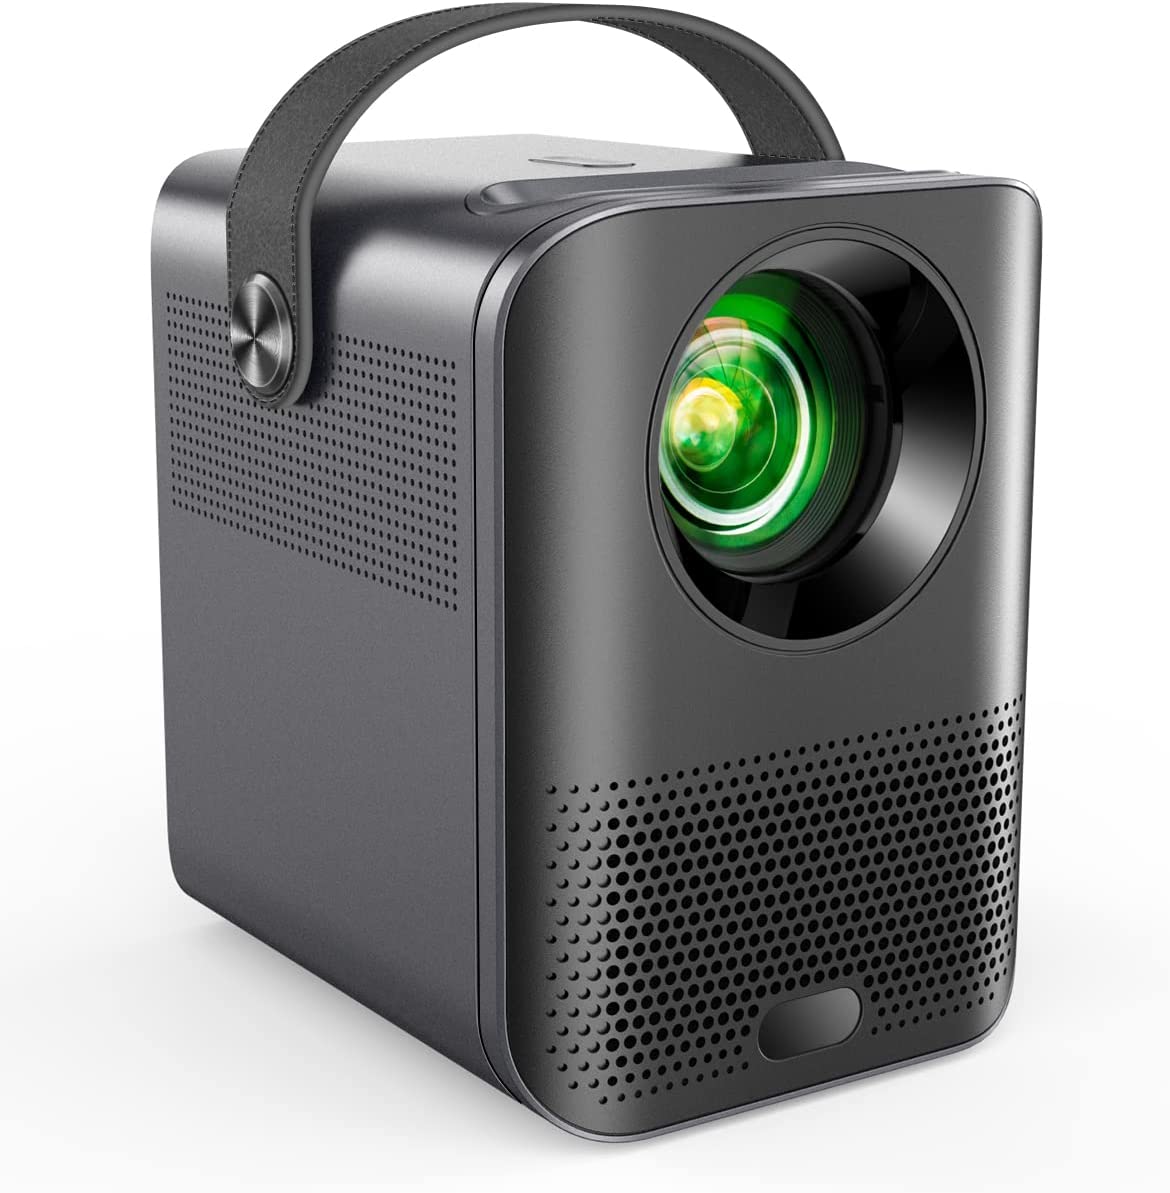 Portable Projector Native 1080p 4K Supported, 2.4G/5G WiFi Projector, 9000Lumens, 4D Keystone Correction, Zoom, 120